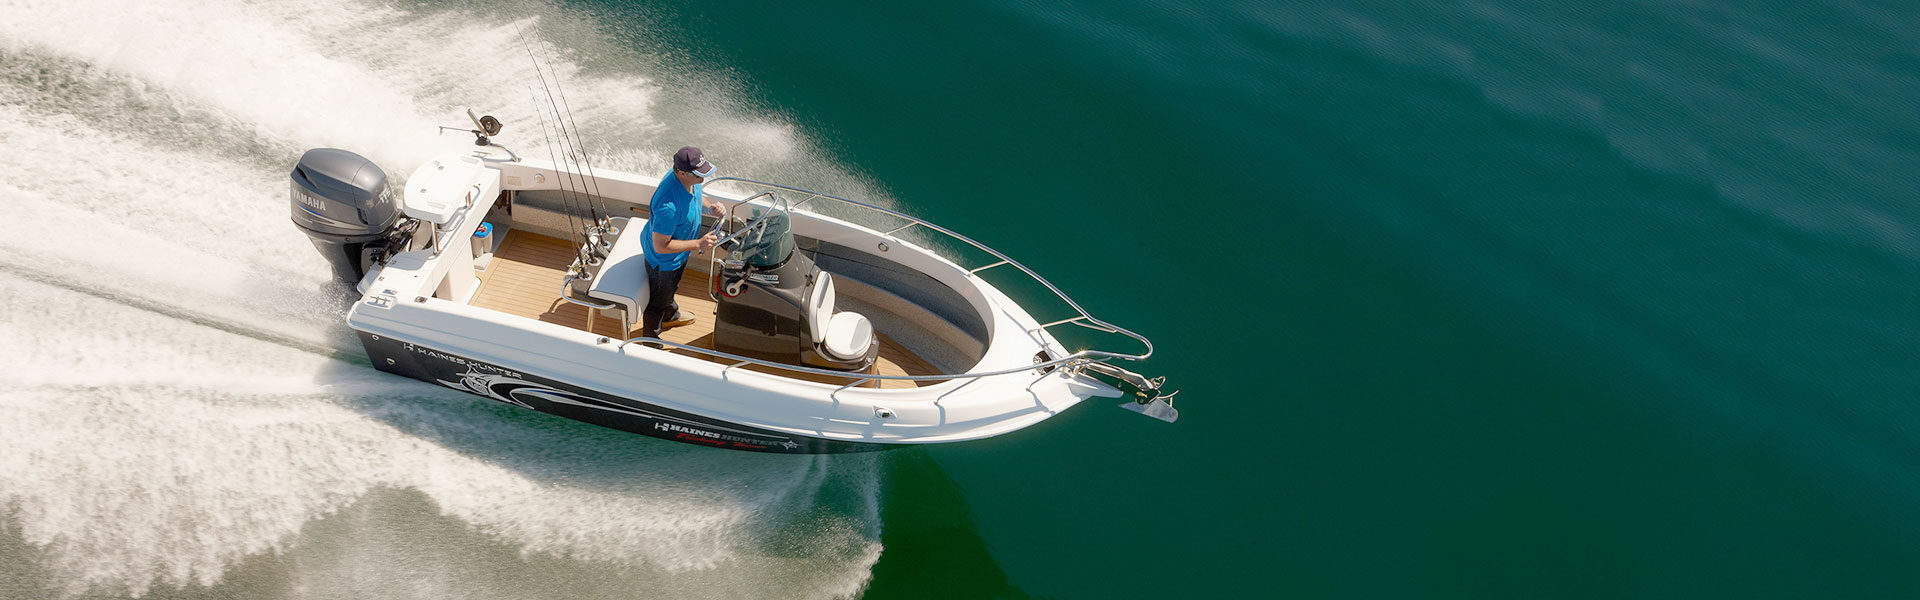 Haines Hunter 565R in Australia’s Greatest Boats Competition